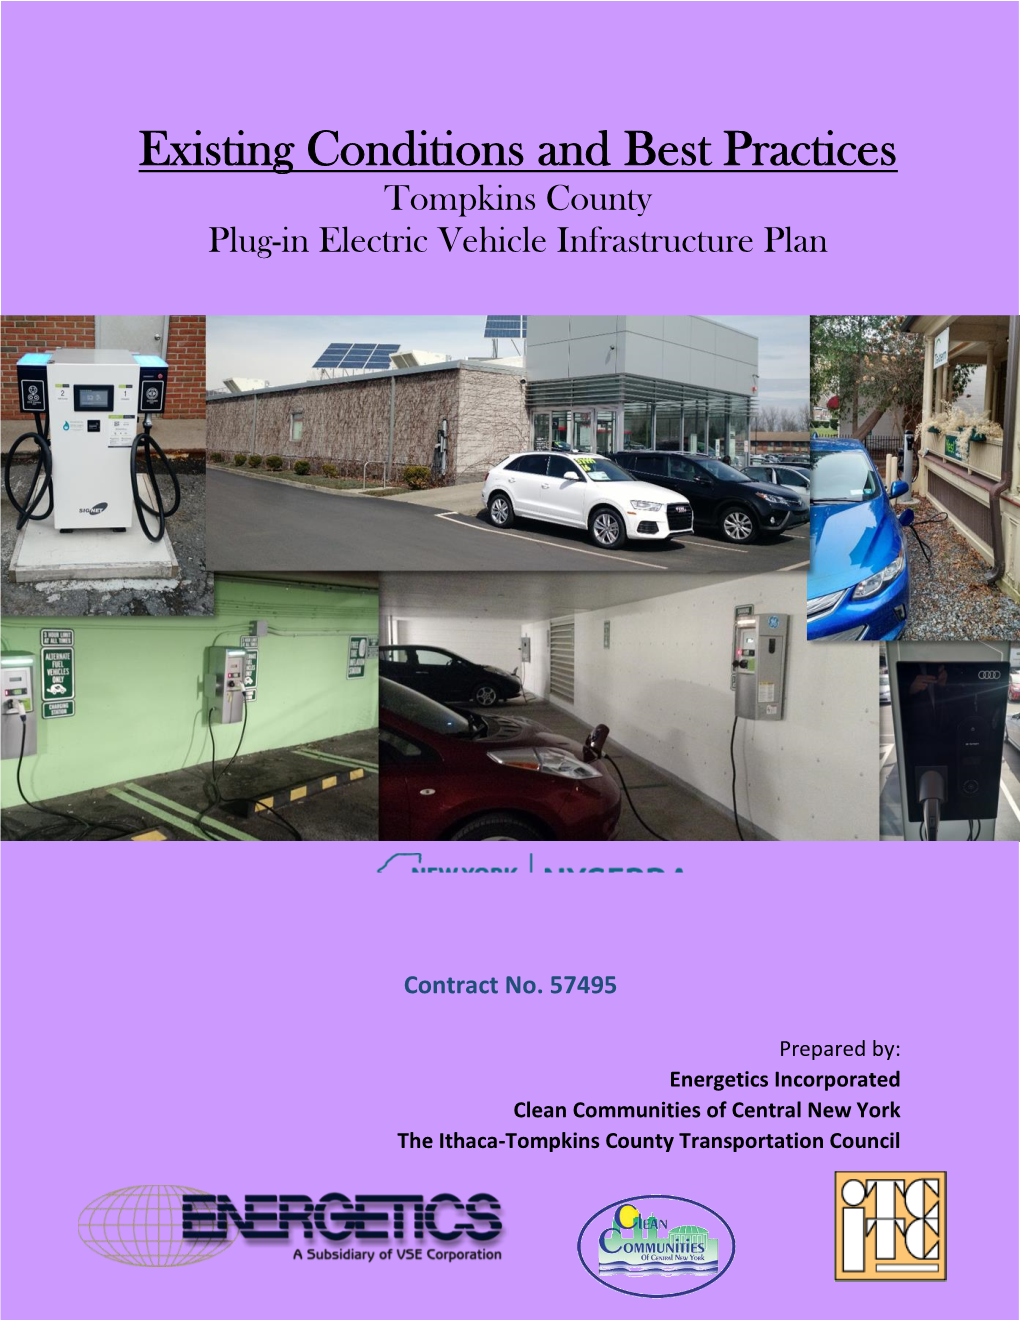 Existing Conditions and Best Practices Tompkins County Plug-In Electric Vehicle Infrastructure Plan